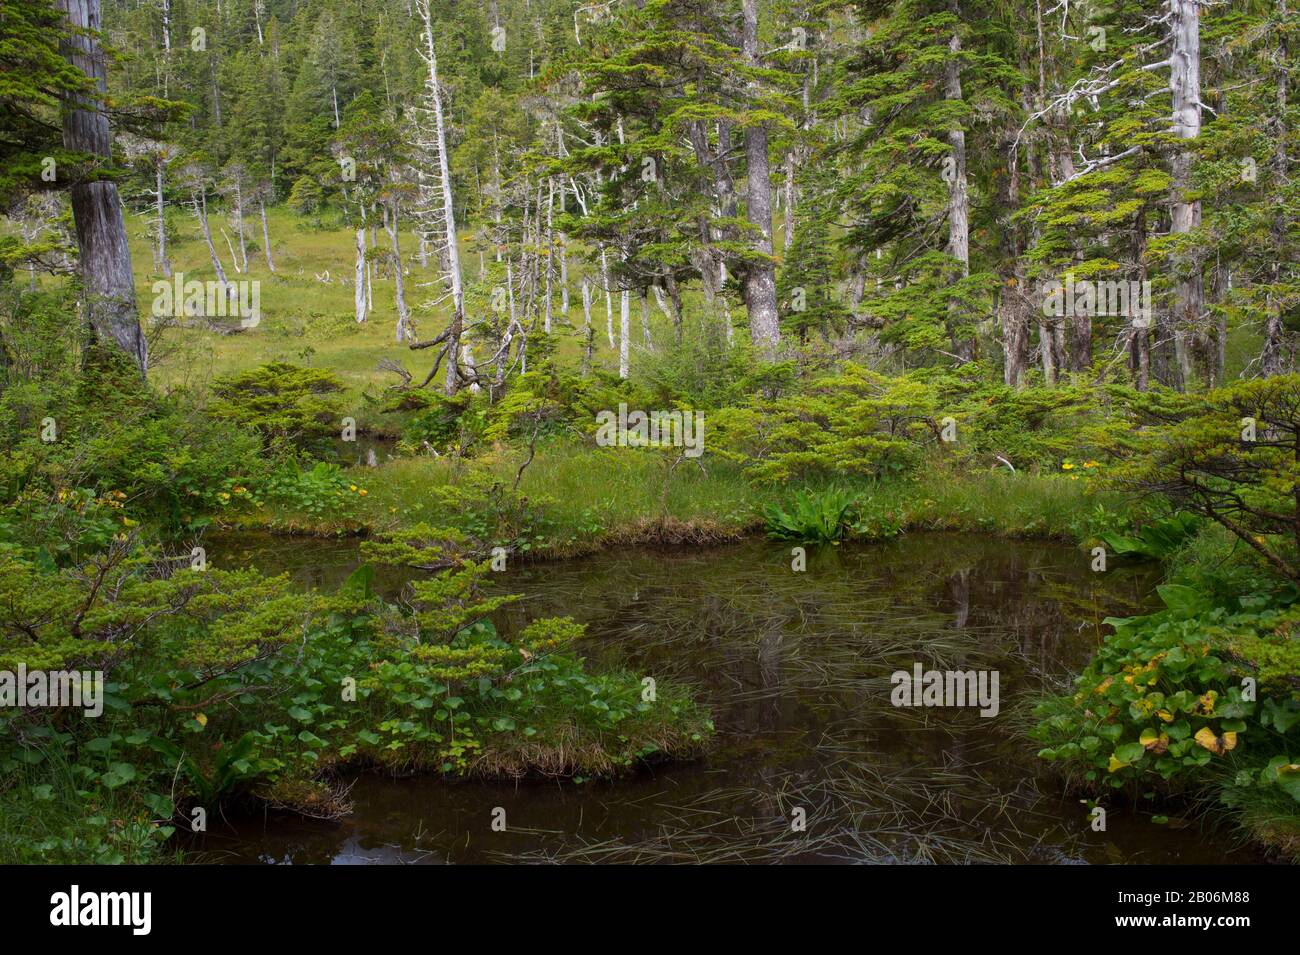 Bog (muskeg) landscape with sphagnum mosses, sedges, and stunted black spruce and tamarack trees, at Idaho Inlet on Chichagof Island, Tongass National Stock Photo